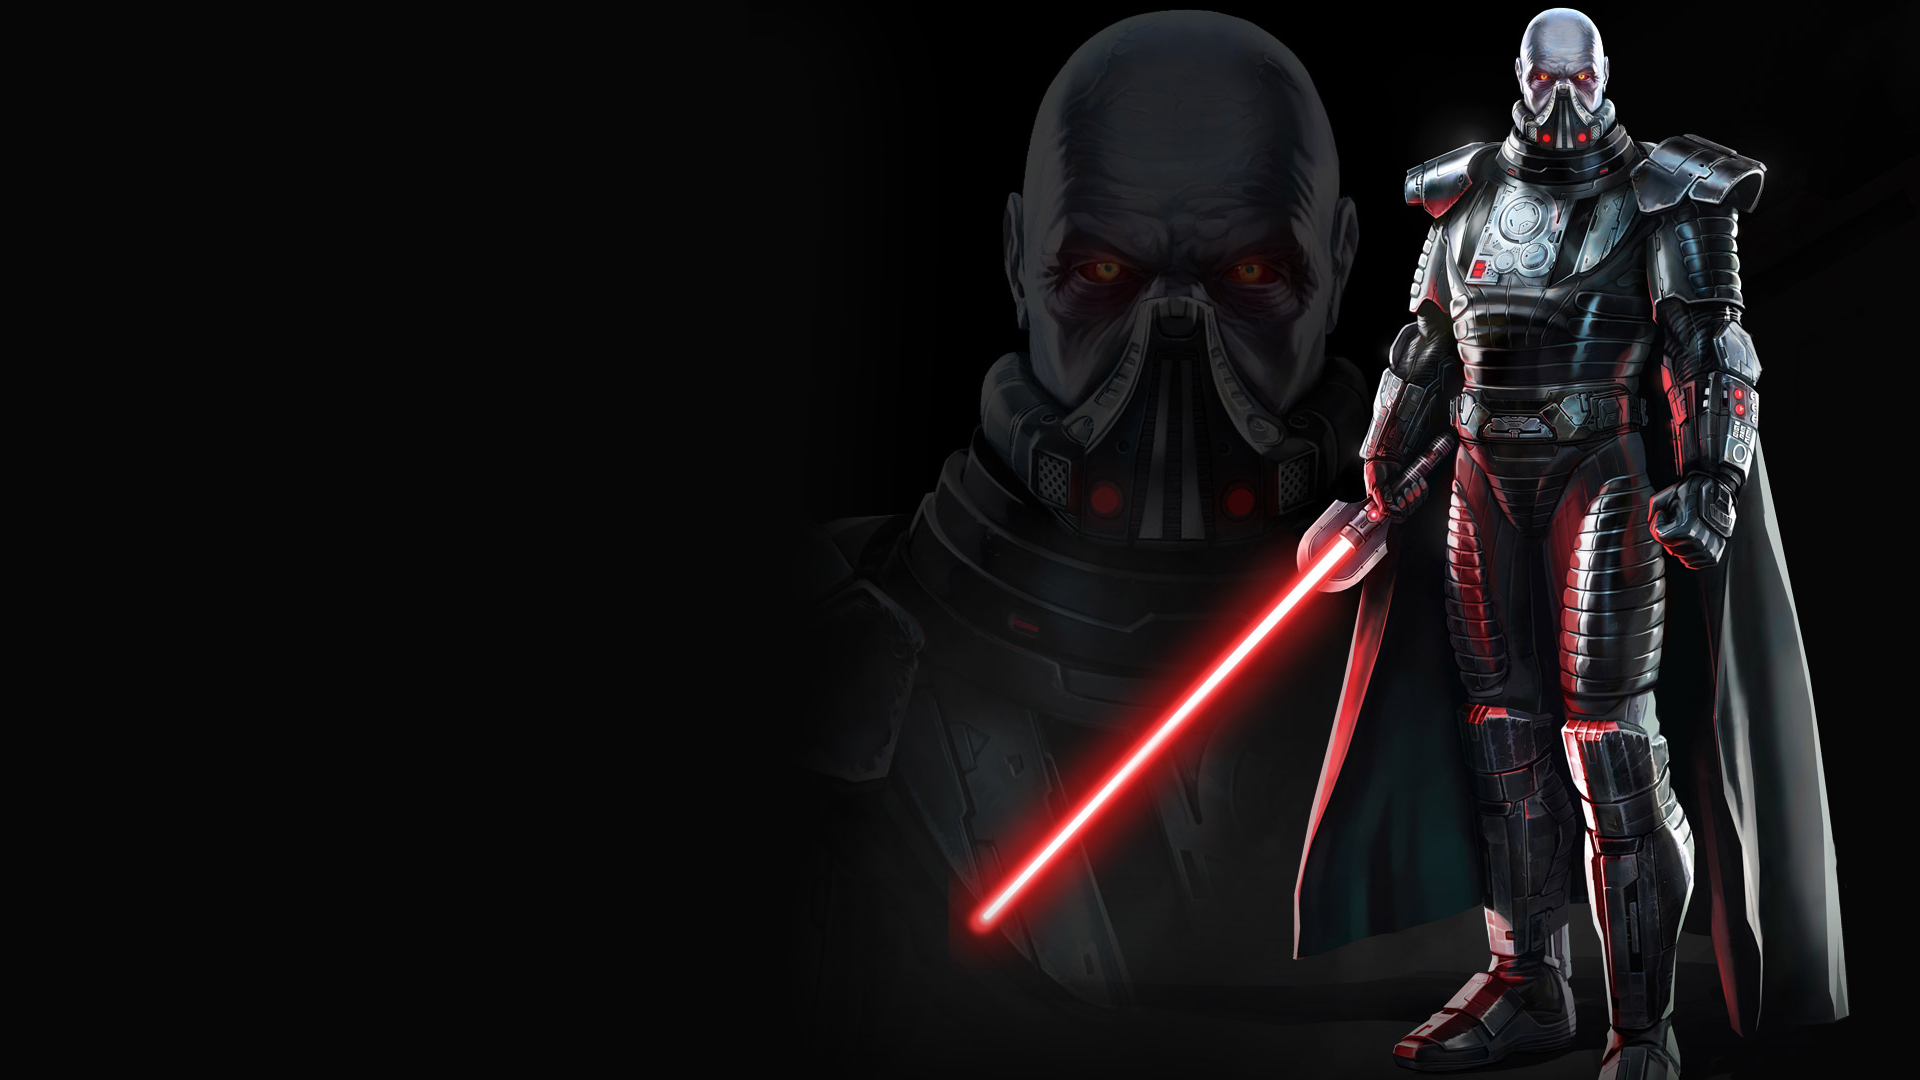 General 1920x1080 Star Wars Sith Star Wars: The Old Republic lightsaber video games Darth Malgus Video Game Villains science fiction video game art red eyes